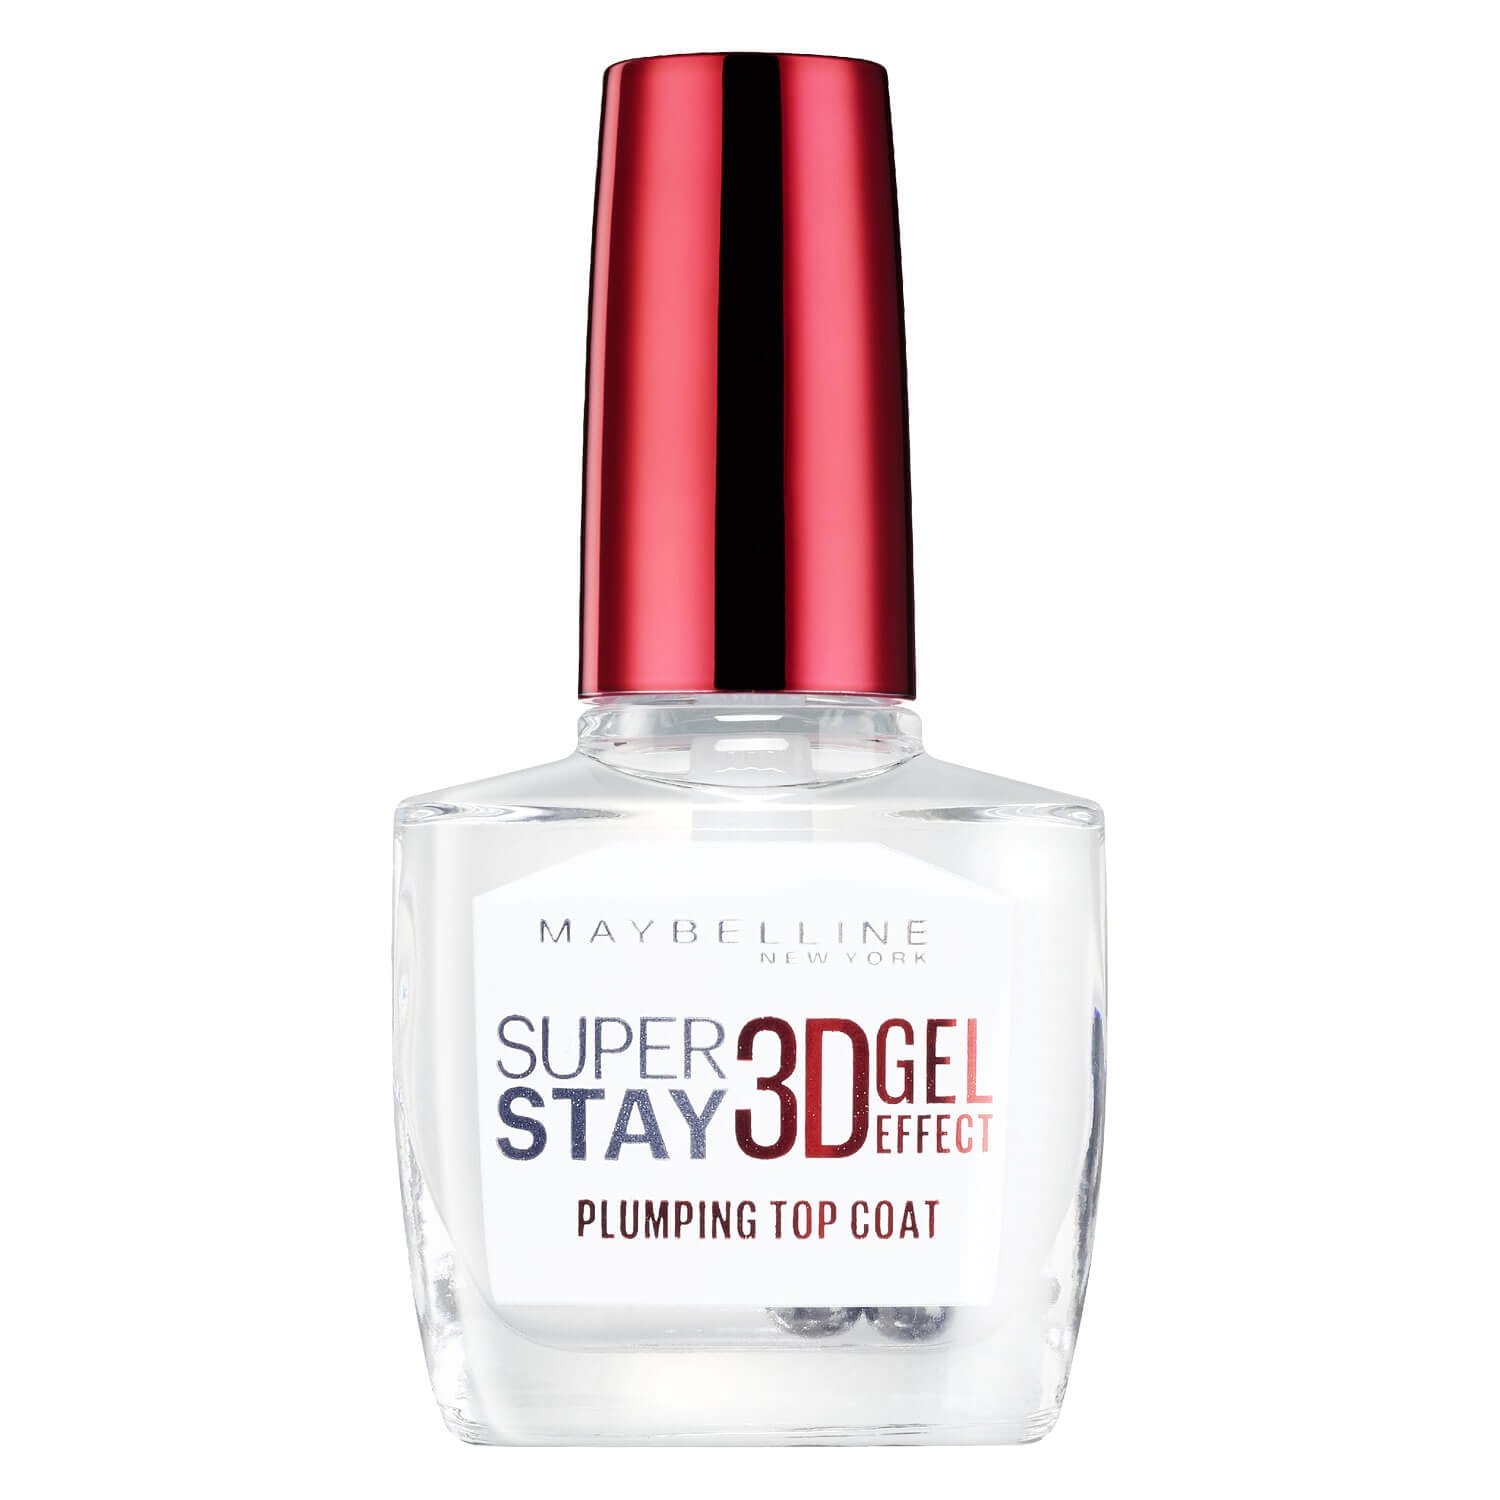 Product image from Maybelline NY Nails - Super Stay 3D Gel Effect Plumping Top Coat